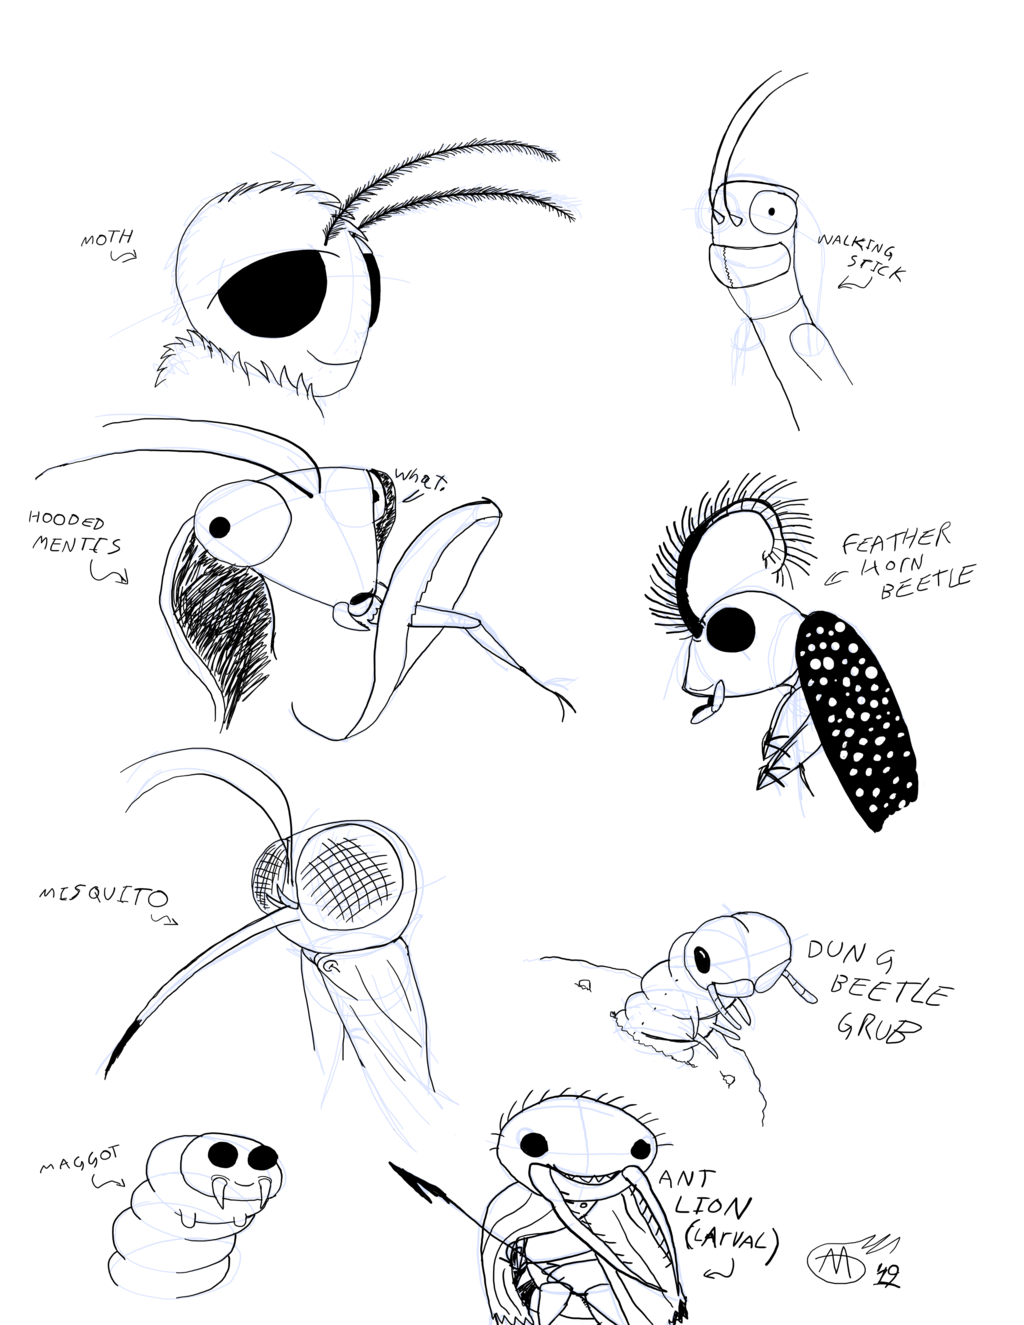 Anthro insect sketch dump